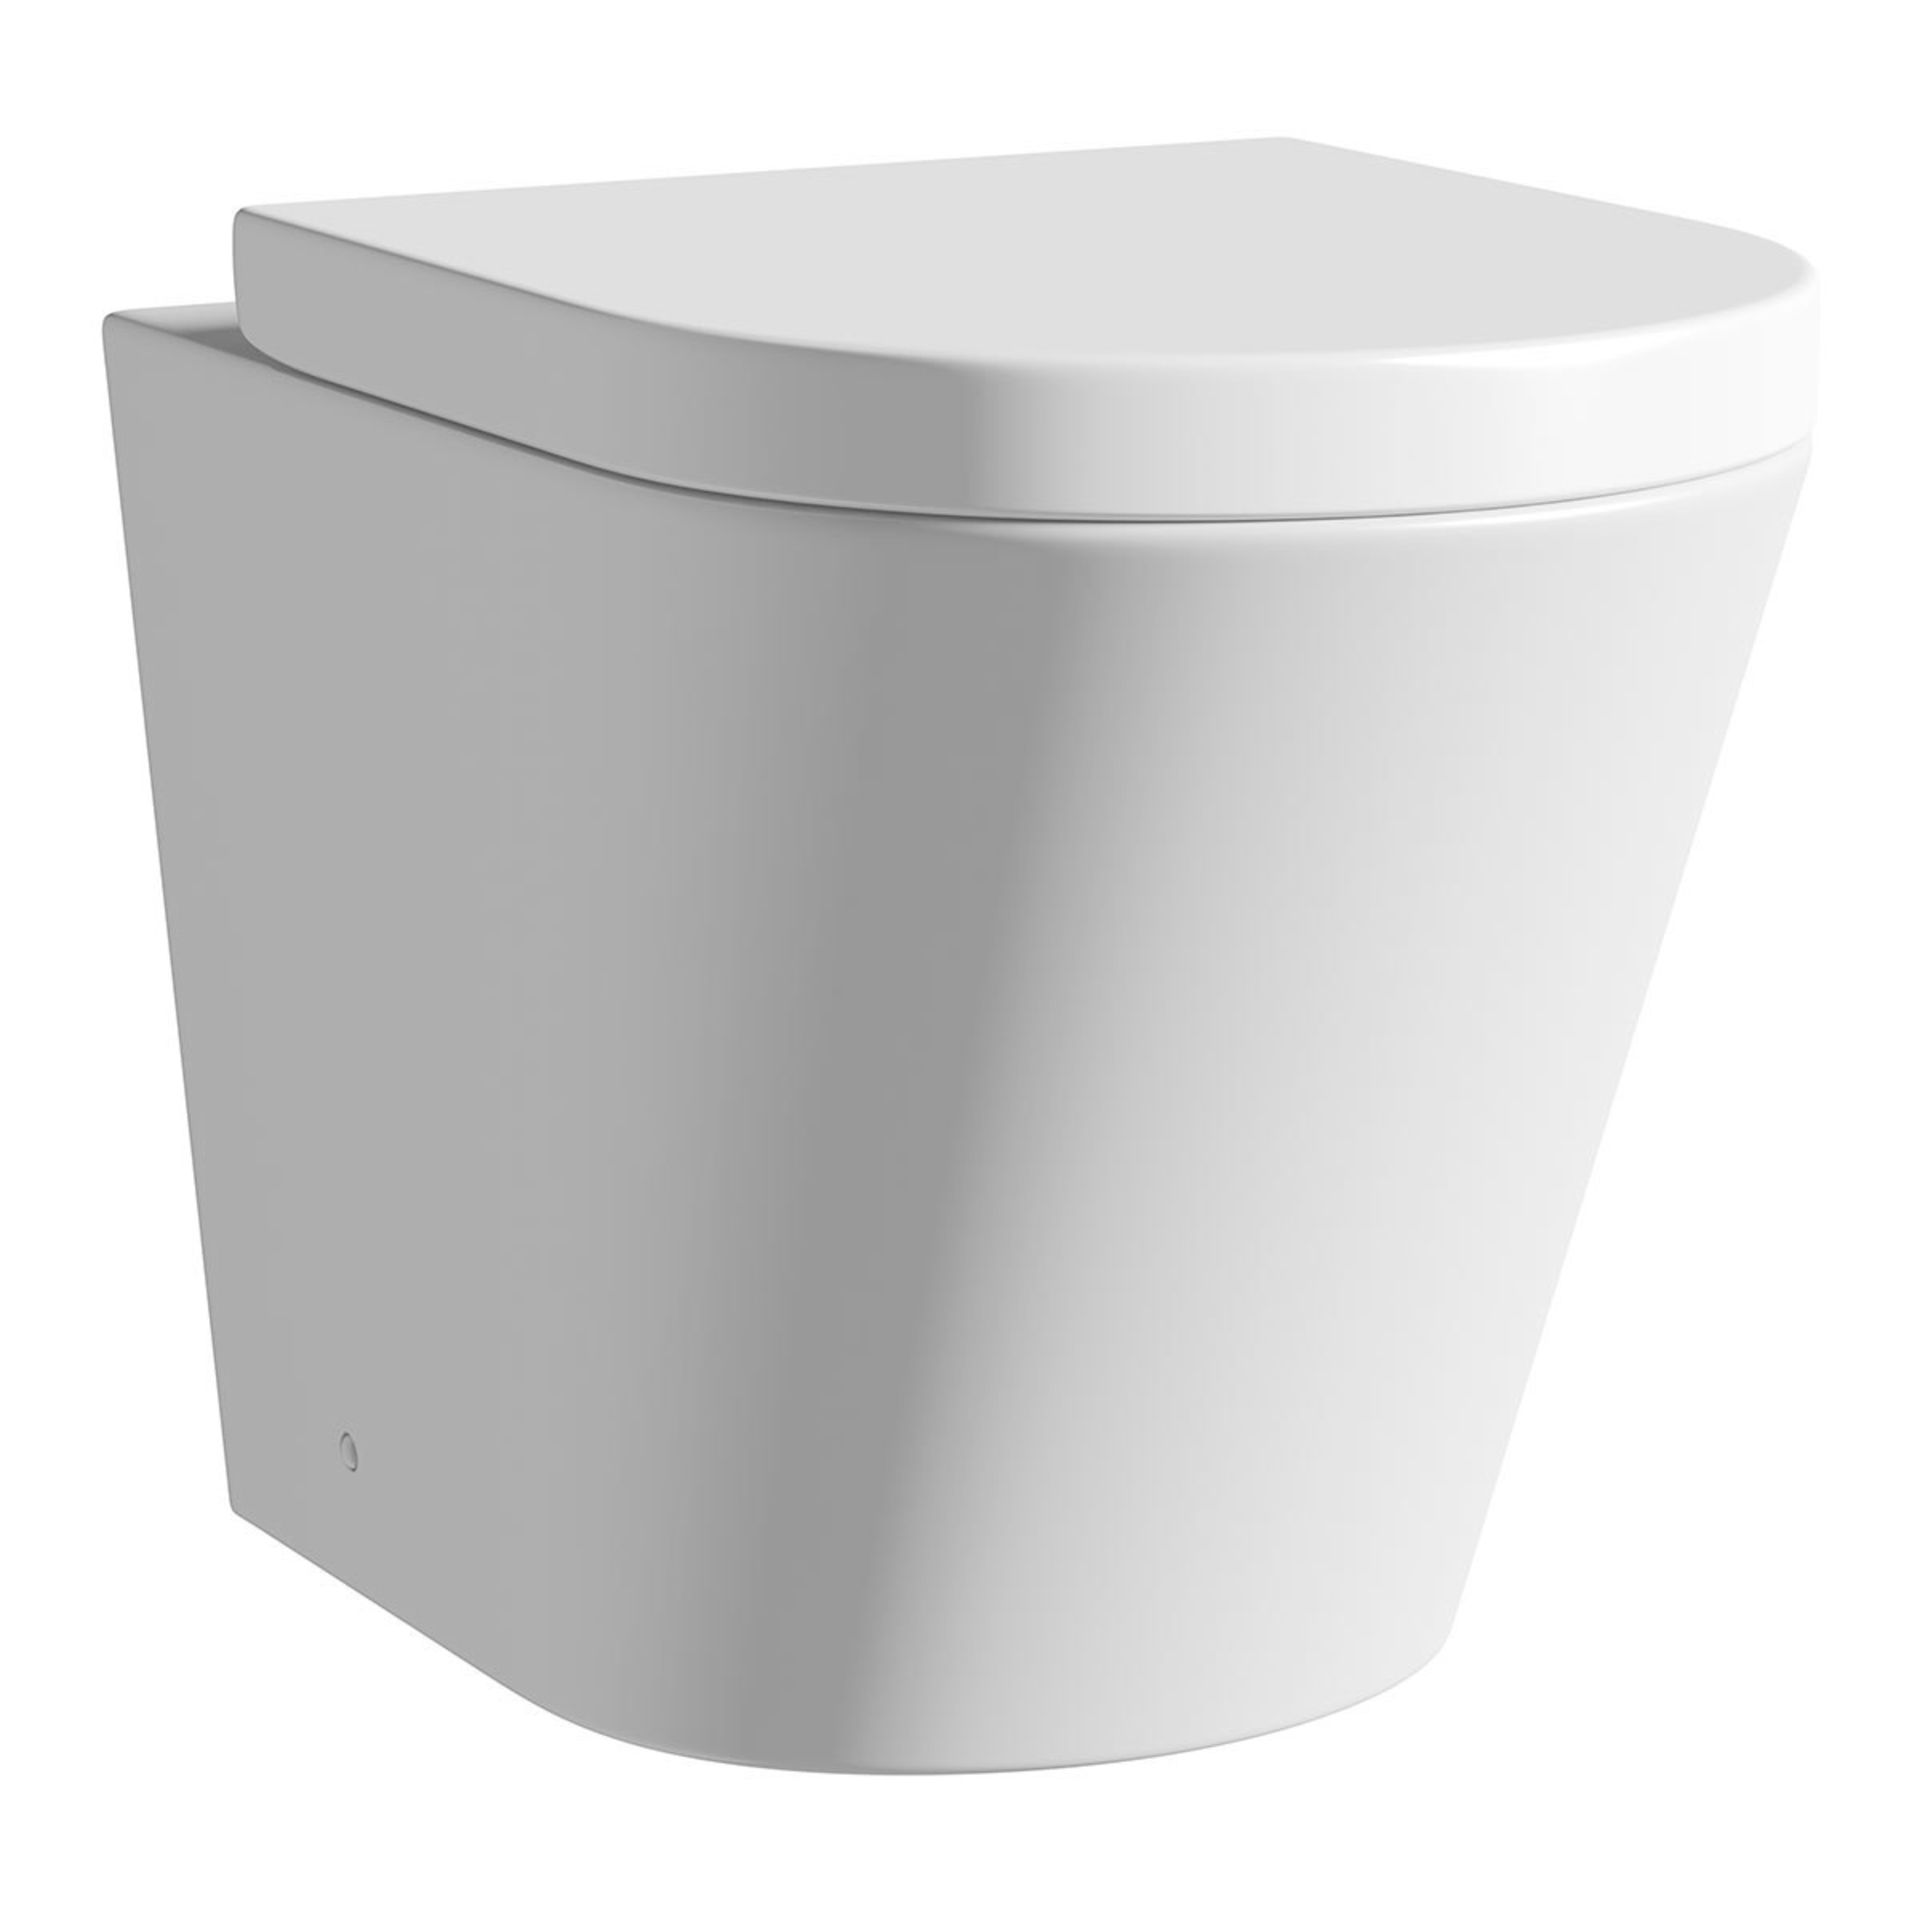 1 x Demar BTW Toilet Pan Including Toilet Seat - Unused Stock - CL190 - Ref BR089 - Location: Bolton